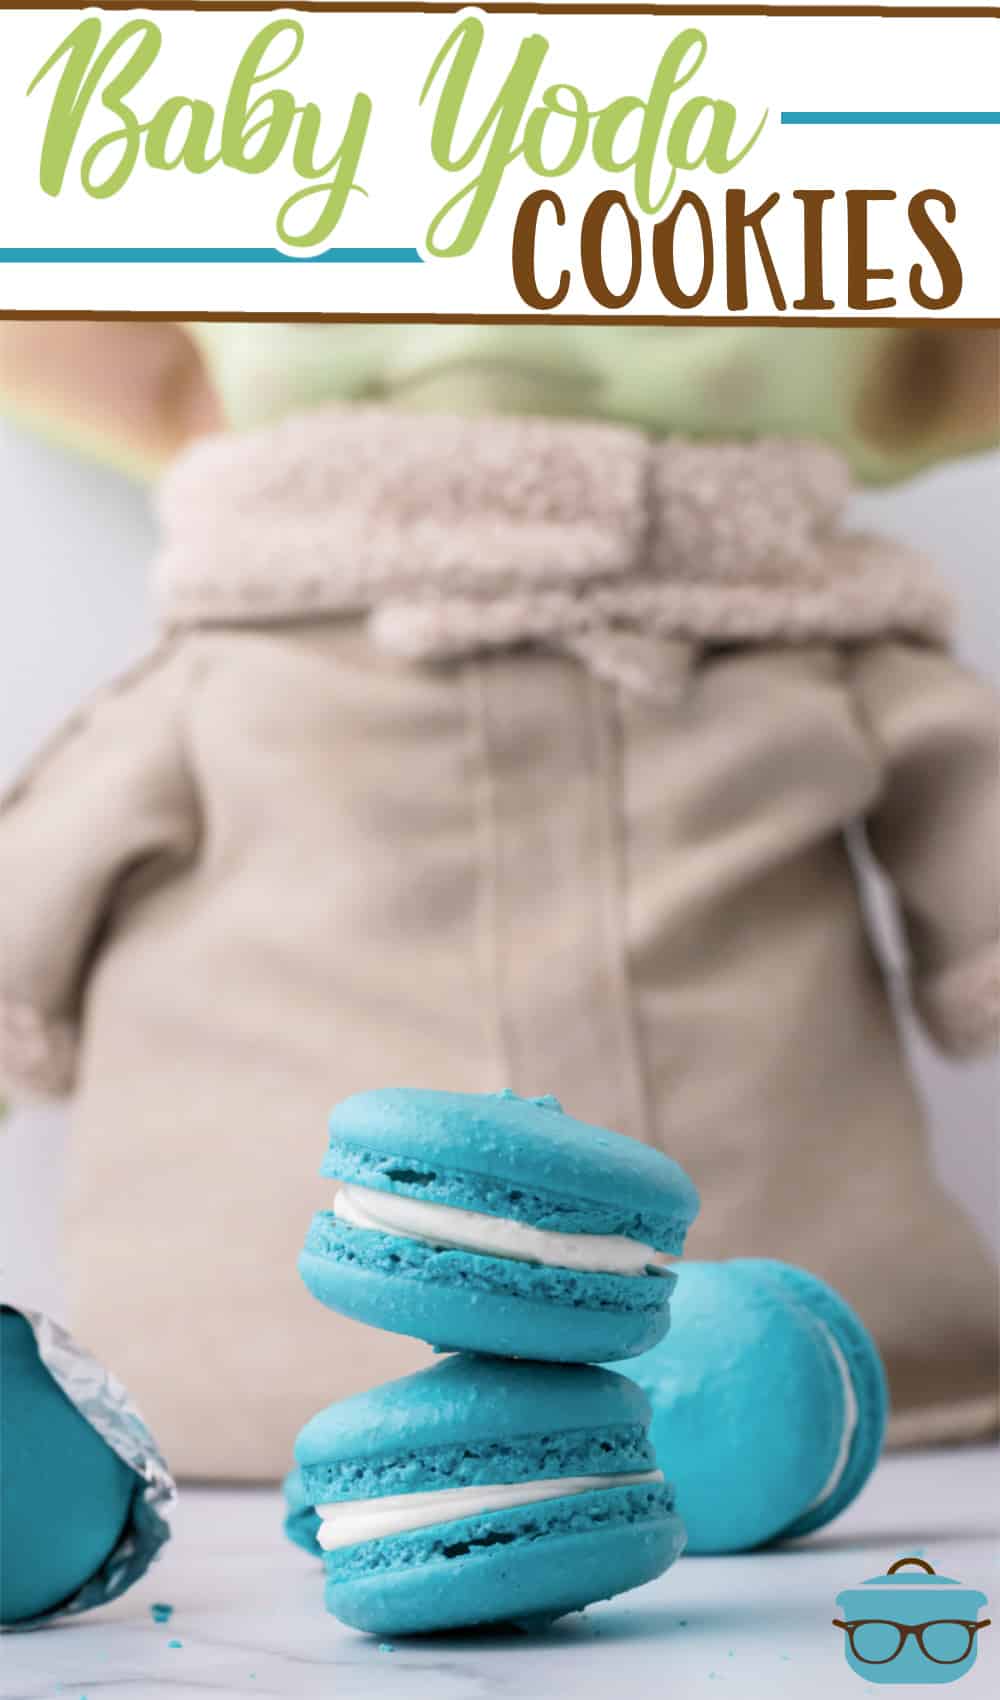 Baby Yoda Cookie recipe (Space Macarons) from The Country Cook, Baby Yoda doll standing up behind teal blue macarons that are stacked two high.